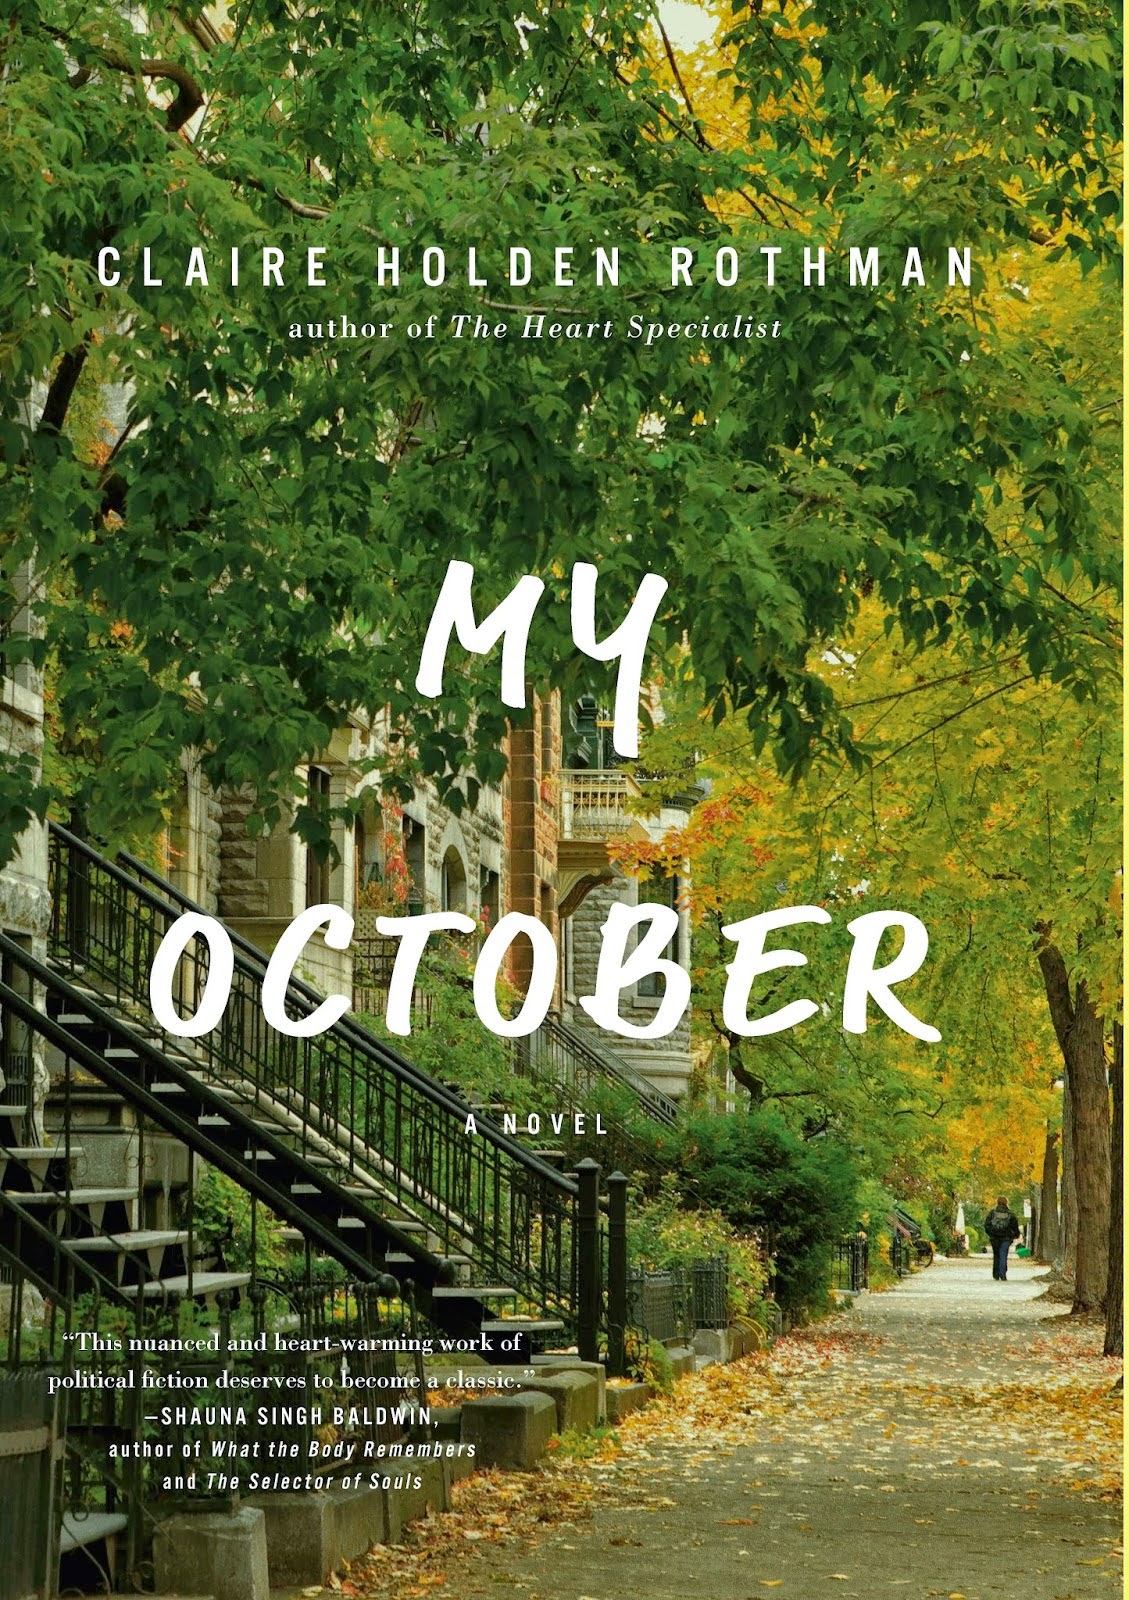 http://discover.halifaxpubliclibraries.ca/?q=title:my%20october